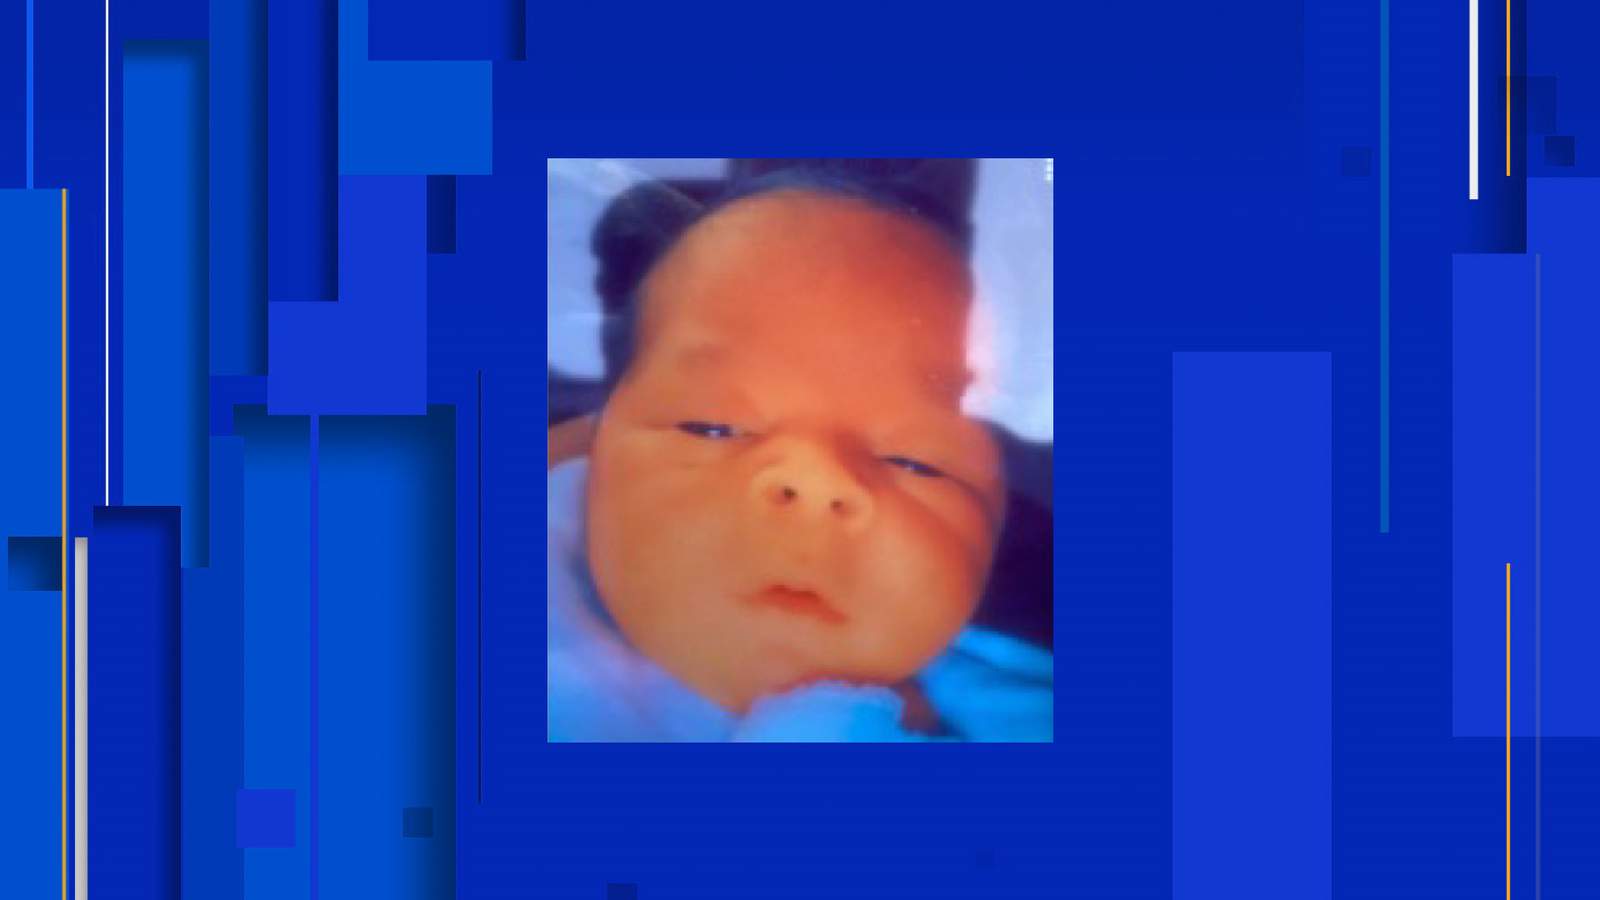 AMBER ALERT: Police search for abducted 1-month-old child last seen in Wells, Texas